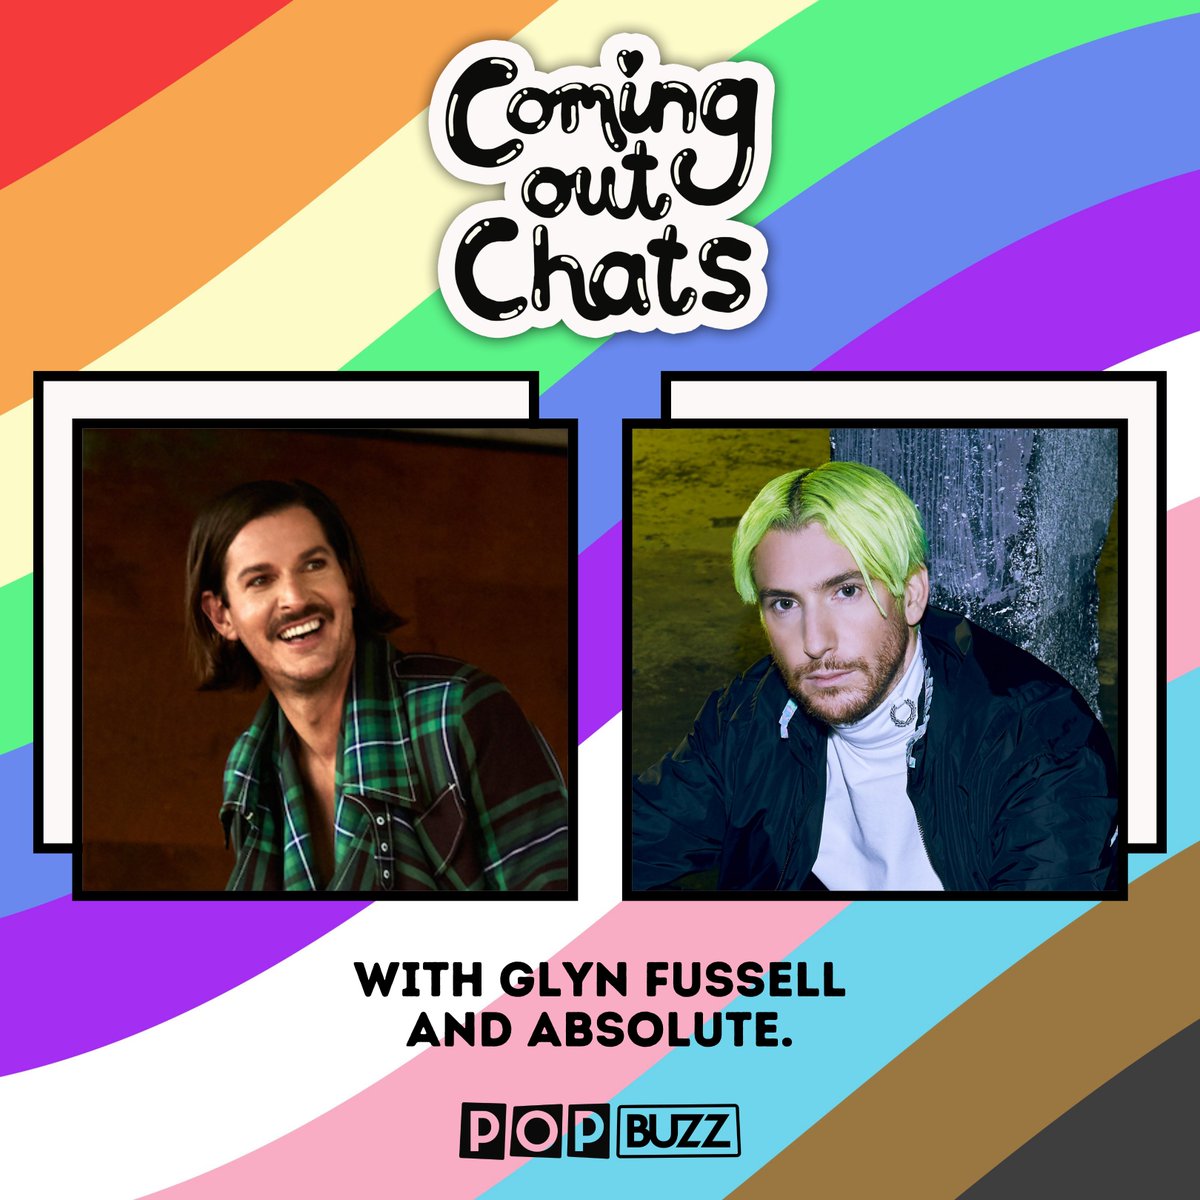 🏳️‍🌈A new episode of ‘Coming Out Chats’ is out now🏳️‍🌈

In this episode Glyn Fussell chats with @absoluteishere about their coming out journeys, the importance of queer allies and so much more✨ #ComingOutChats

Listen here➡️ popbuzz.co/3p2L6dM